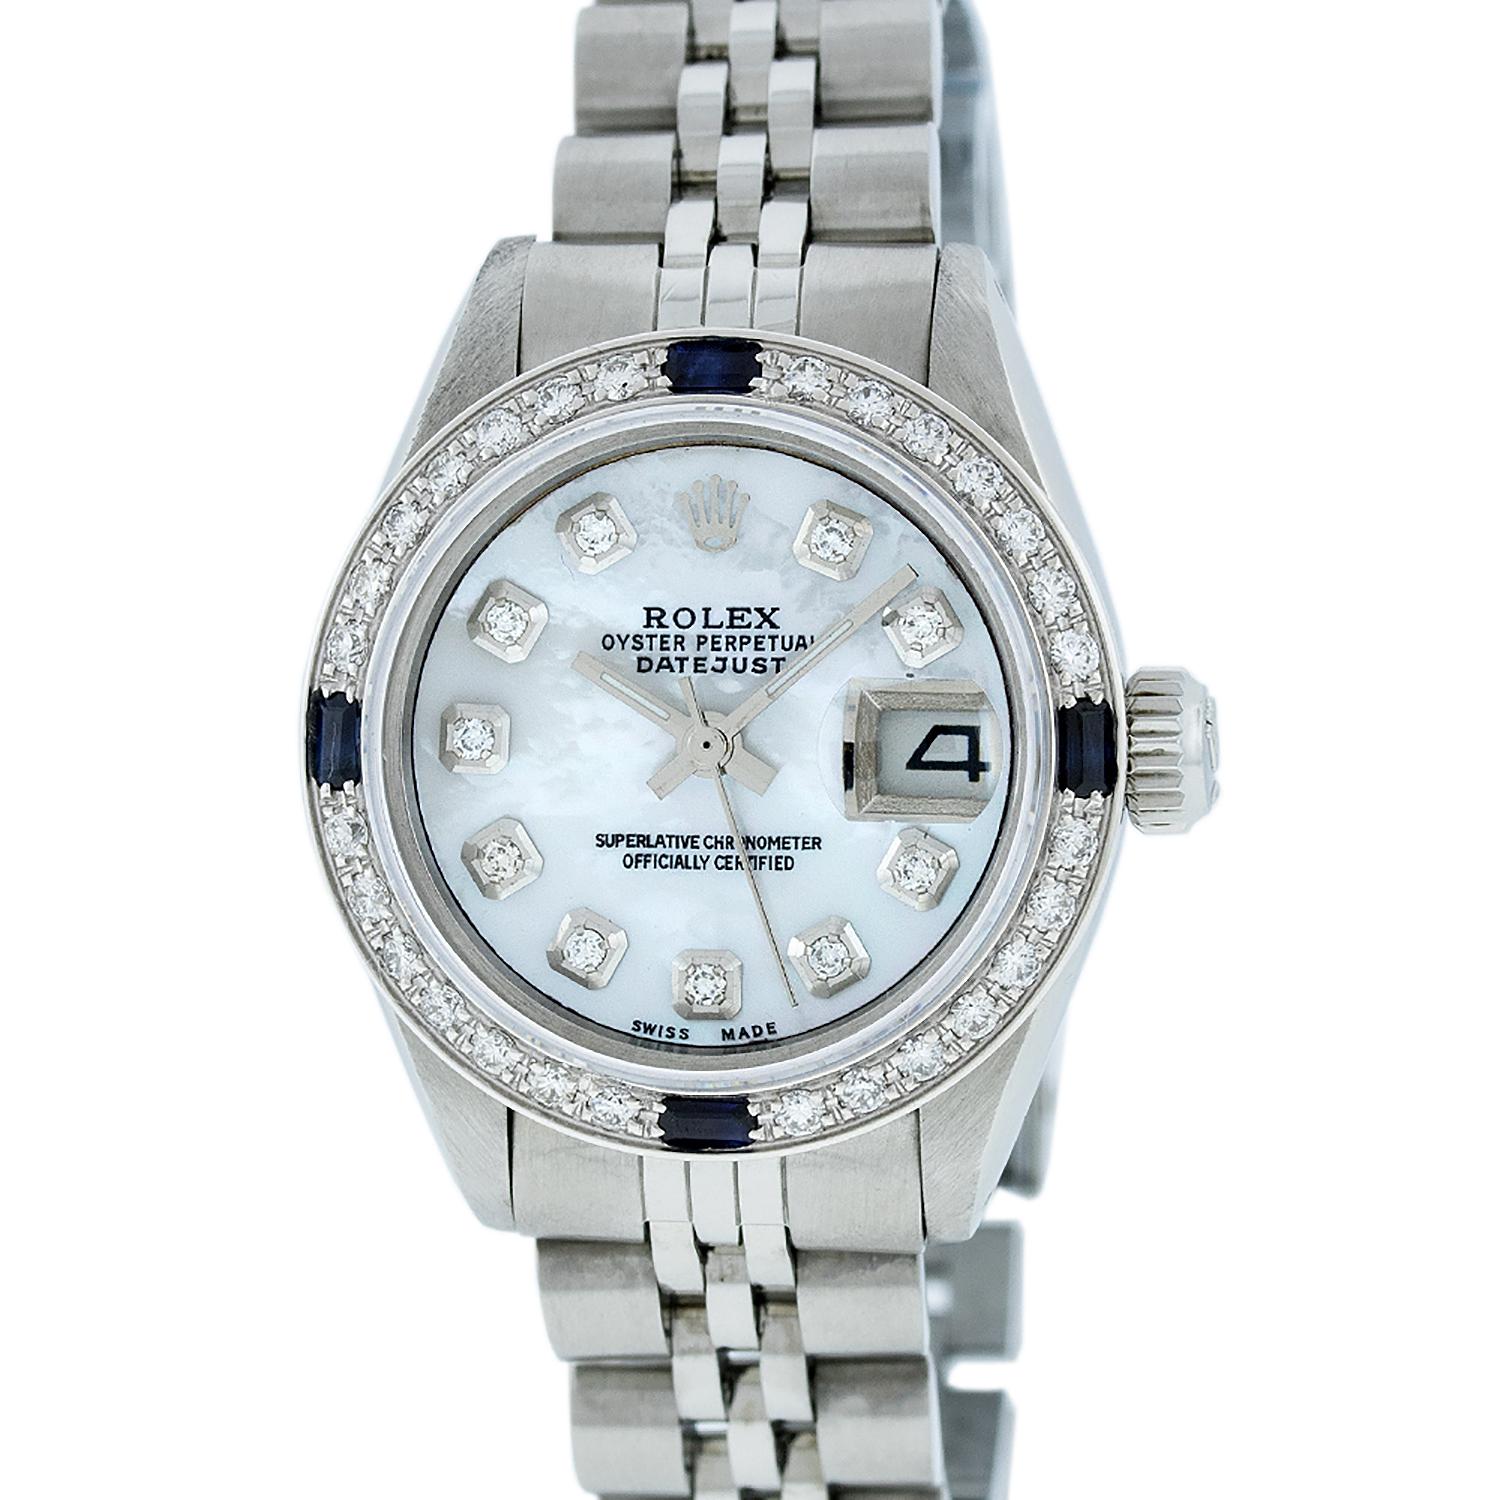 WATCH DESCRIPTION

BRAND : Rolex
MODEL : Datejust
CASE SIZE : 26mm
CASE : Rolex Stainless Steel Case
GENDER : Women's

WATCH FEATURES
 
DIAL : Rolex Custom Refinished Mother Of Pearl With Diamond Hour Markers
BEZEL : Custom 18K White Gold Bead-set